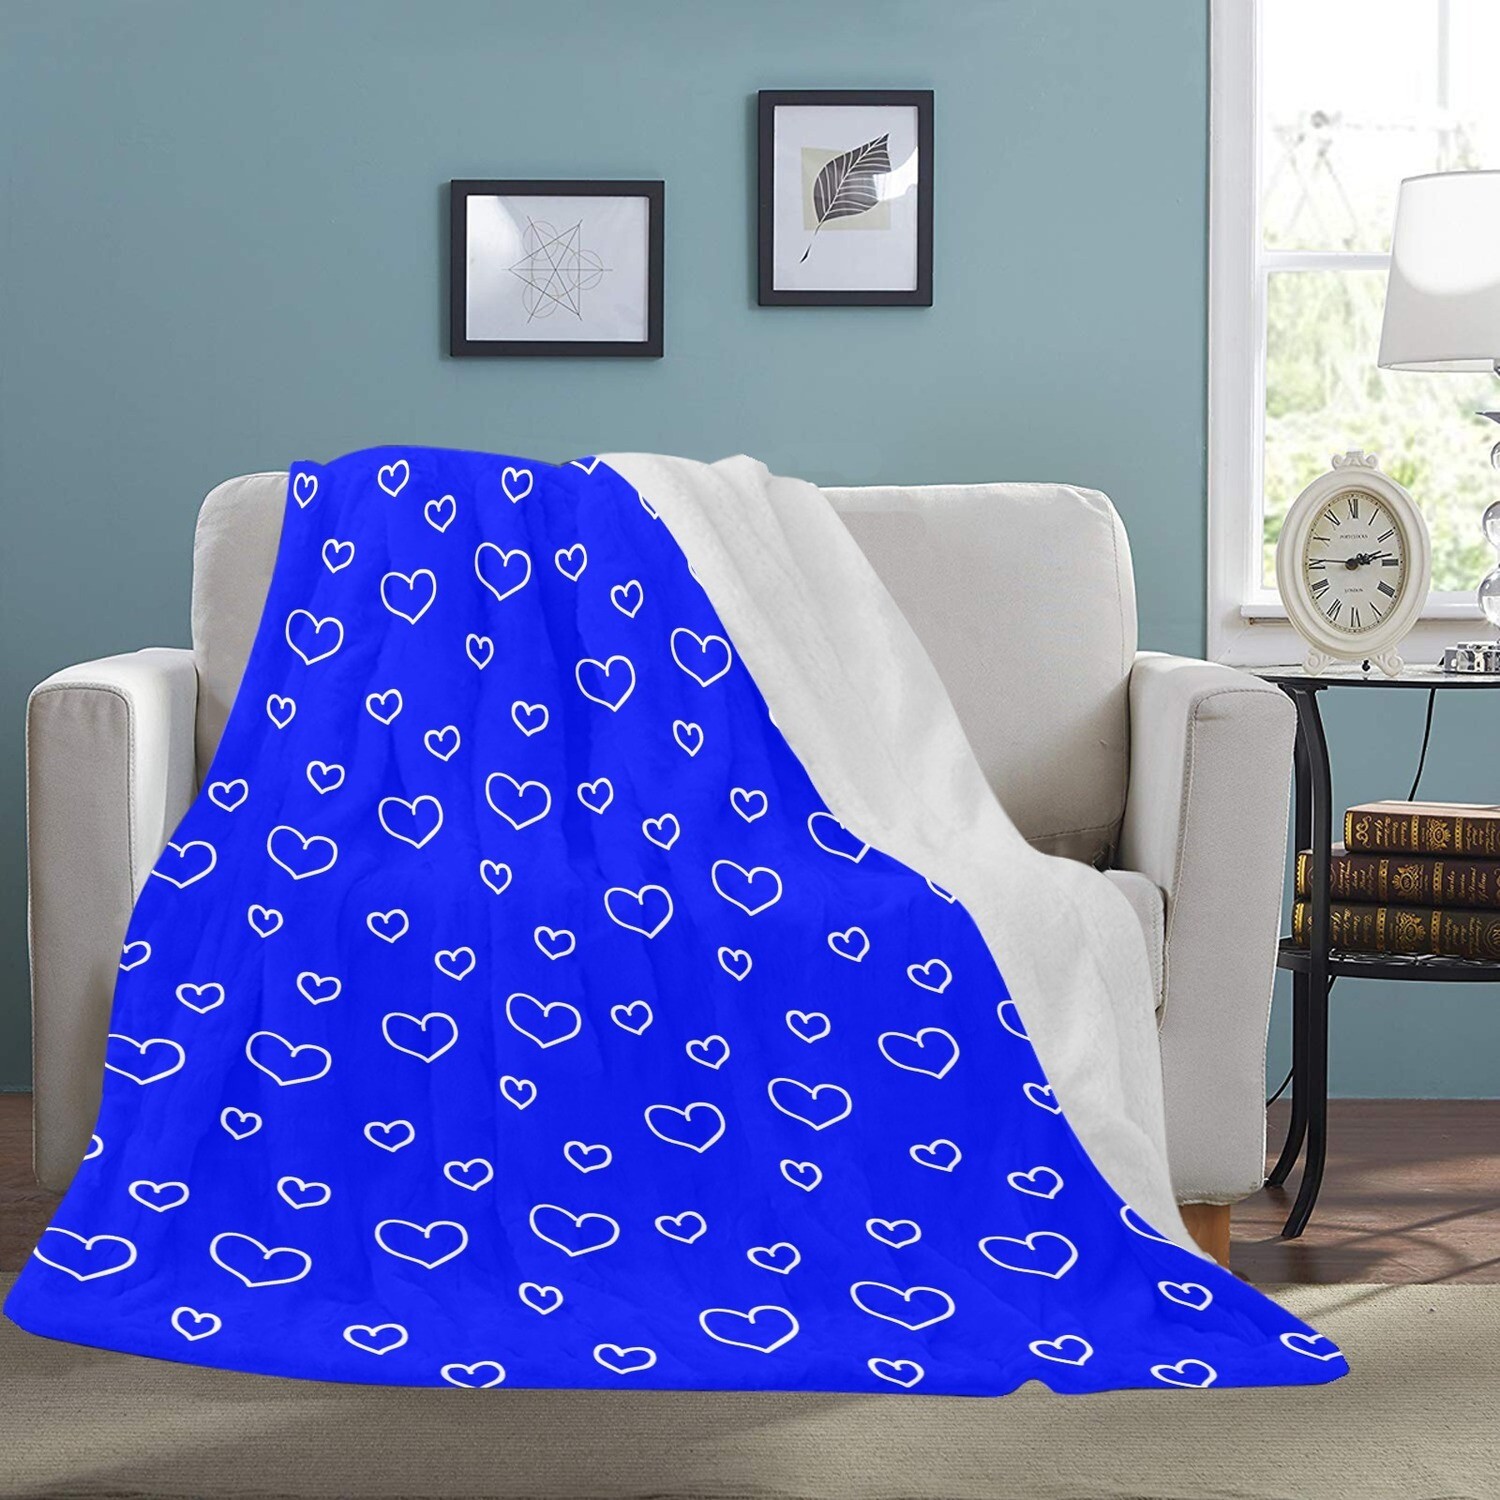 🤴🏽👸🏽💕Large Ultra-Soft Micro Fleece Blanket Valentine white outline hearts on royal blue, gift, gift for her, gift for him, gift for them, 70"x80"